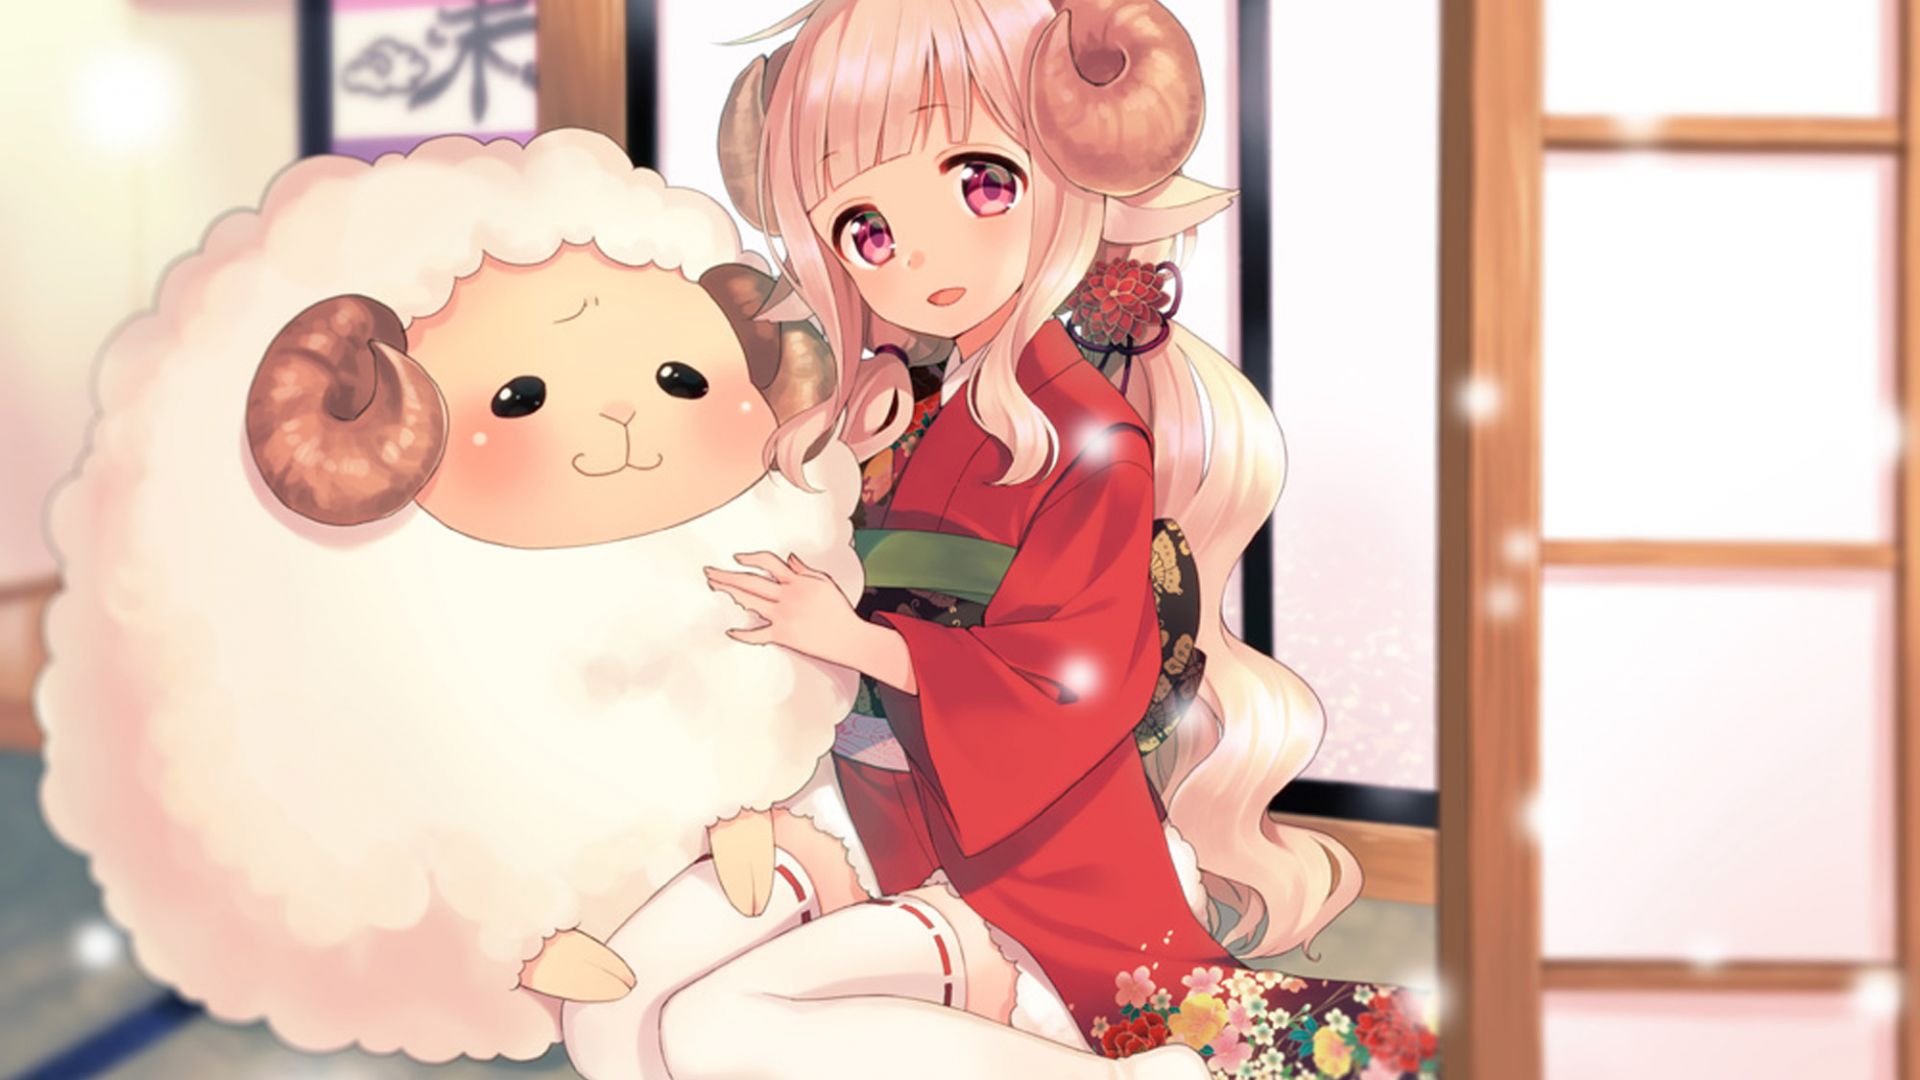 Desktop Wallpaper Cute, Anime Girl, And Sheep, Original, Hd Image, Picture,  Background, 94aebe